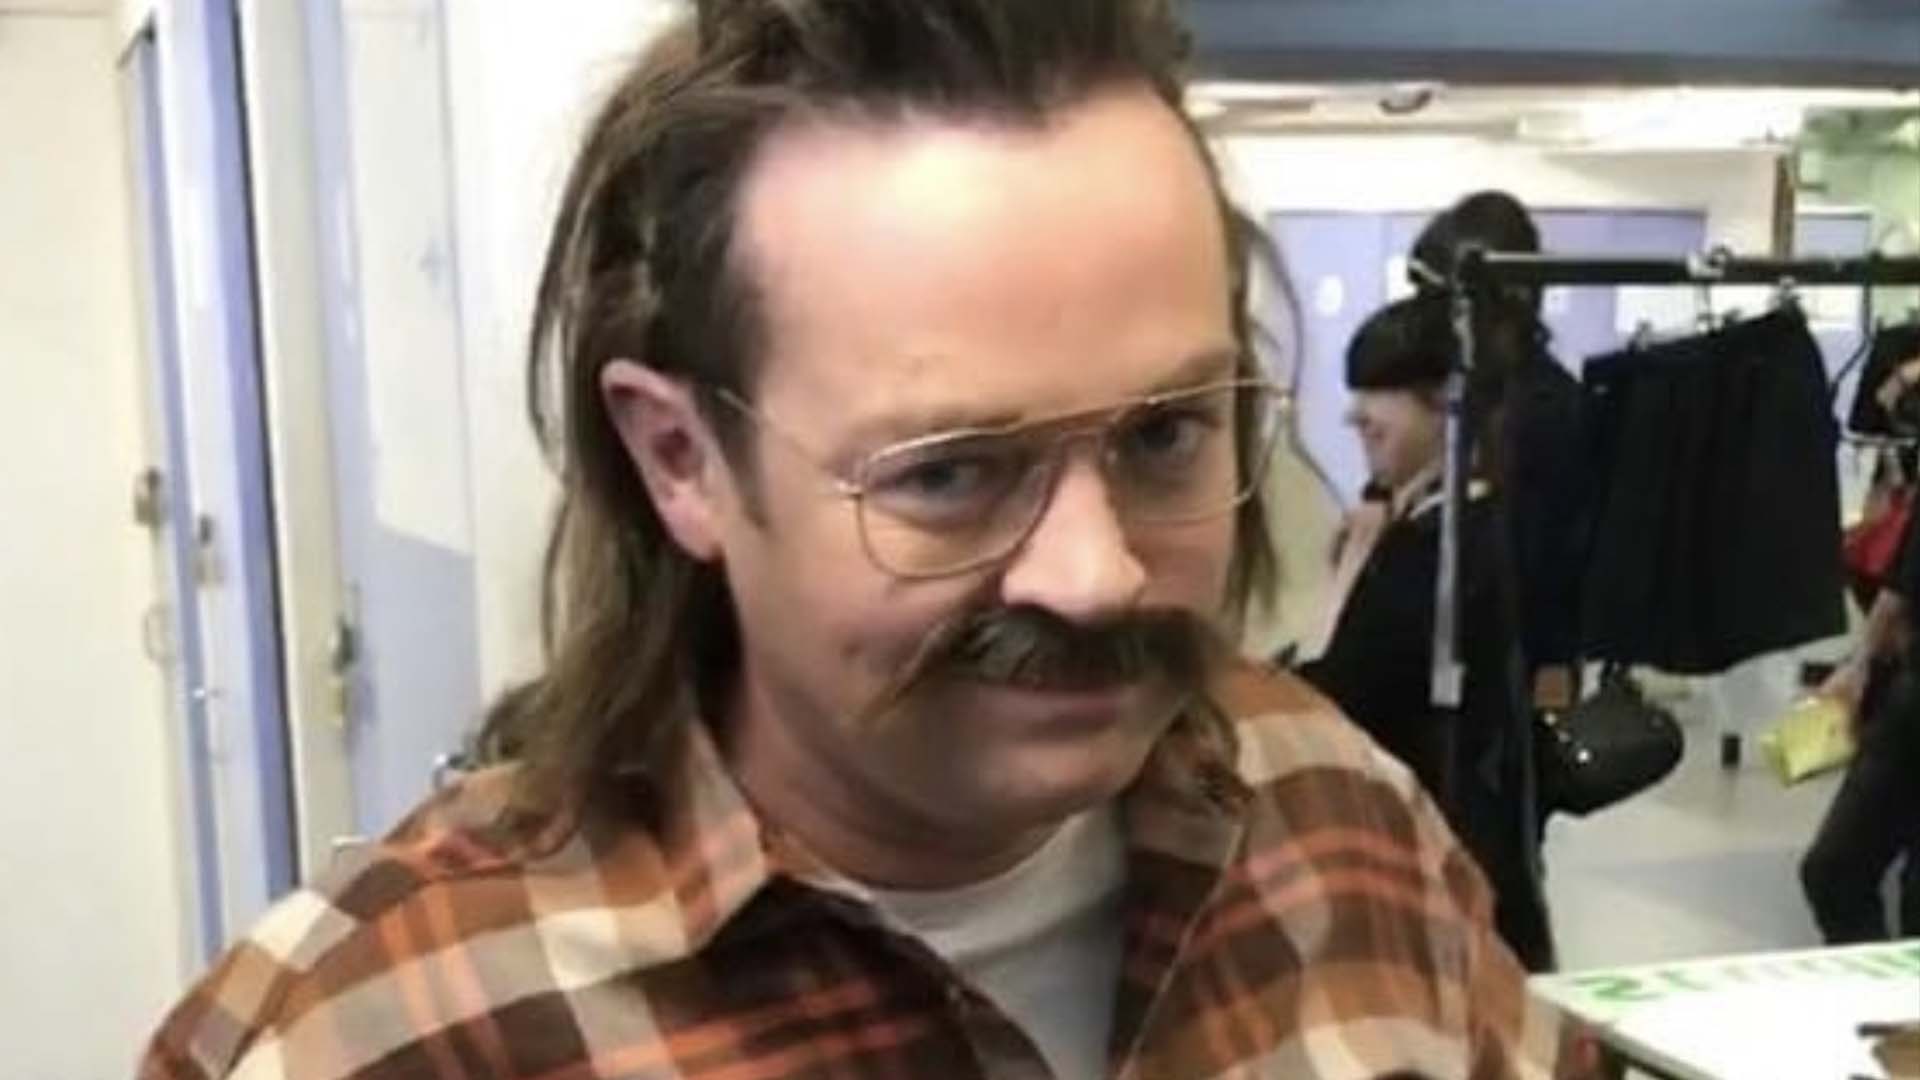 Stephen Mulhern in a wig and moustache